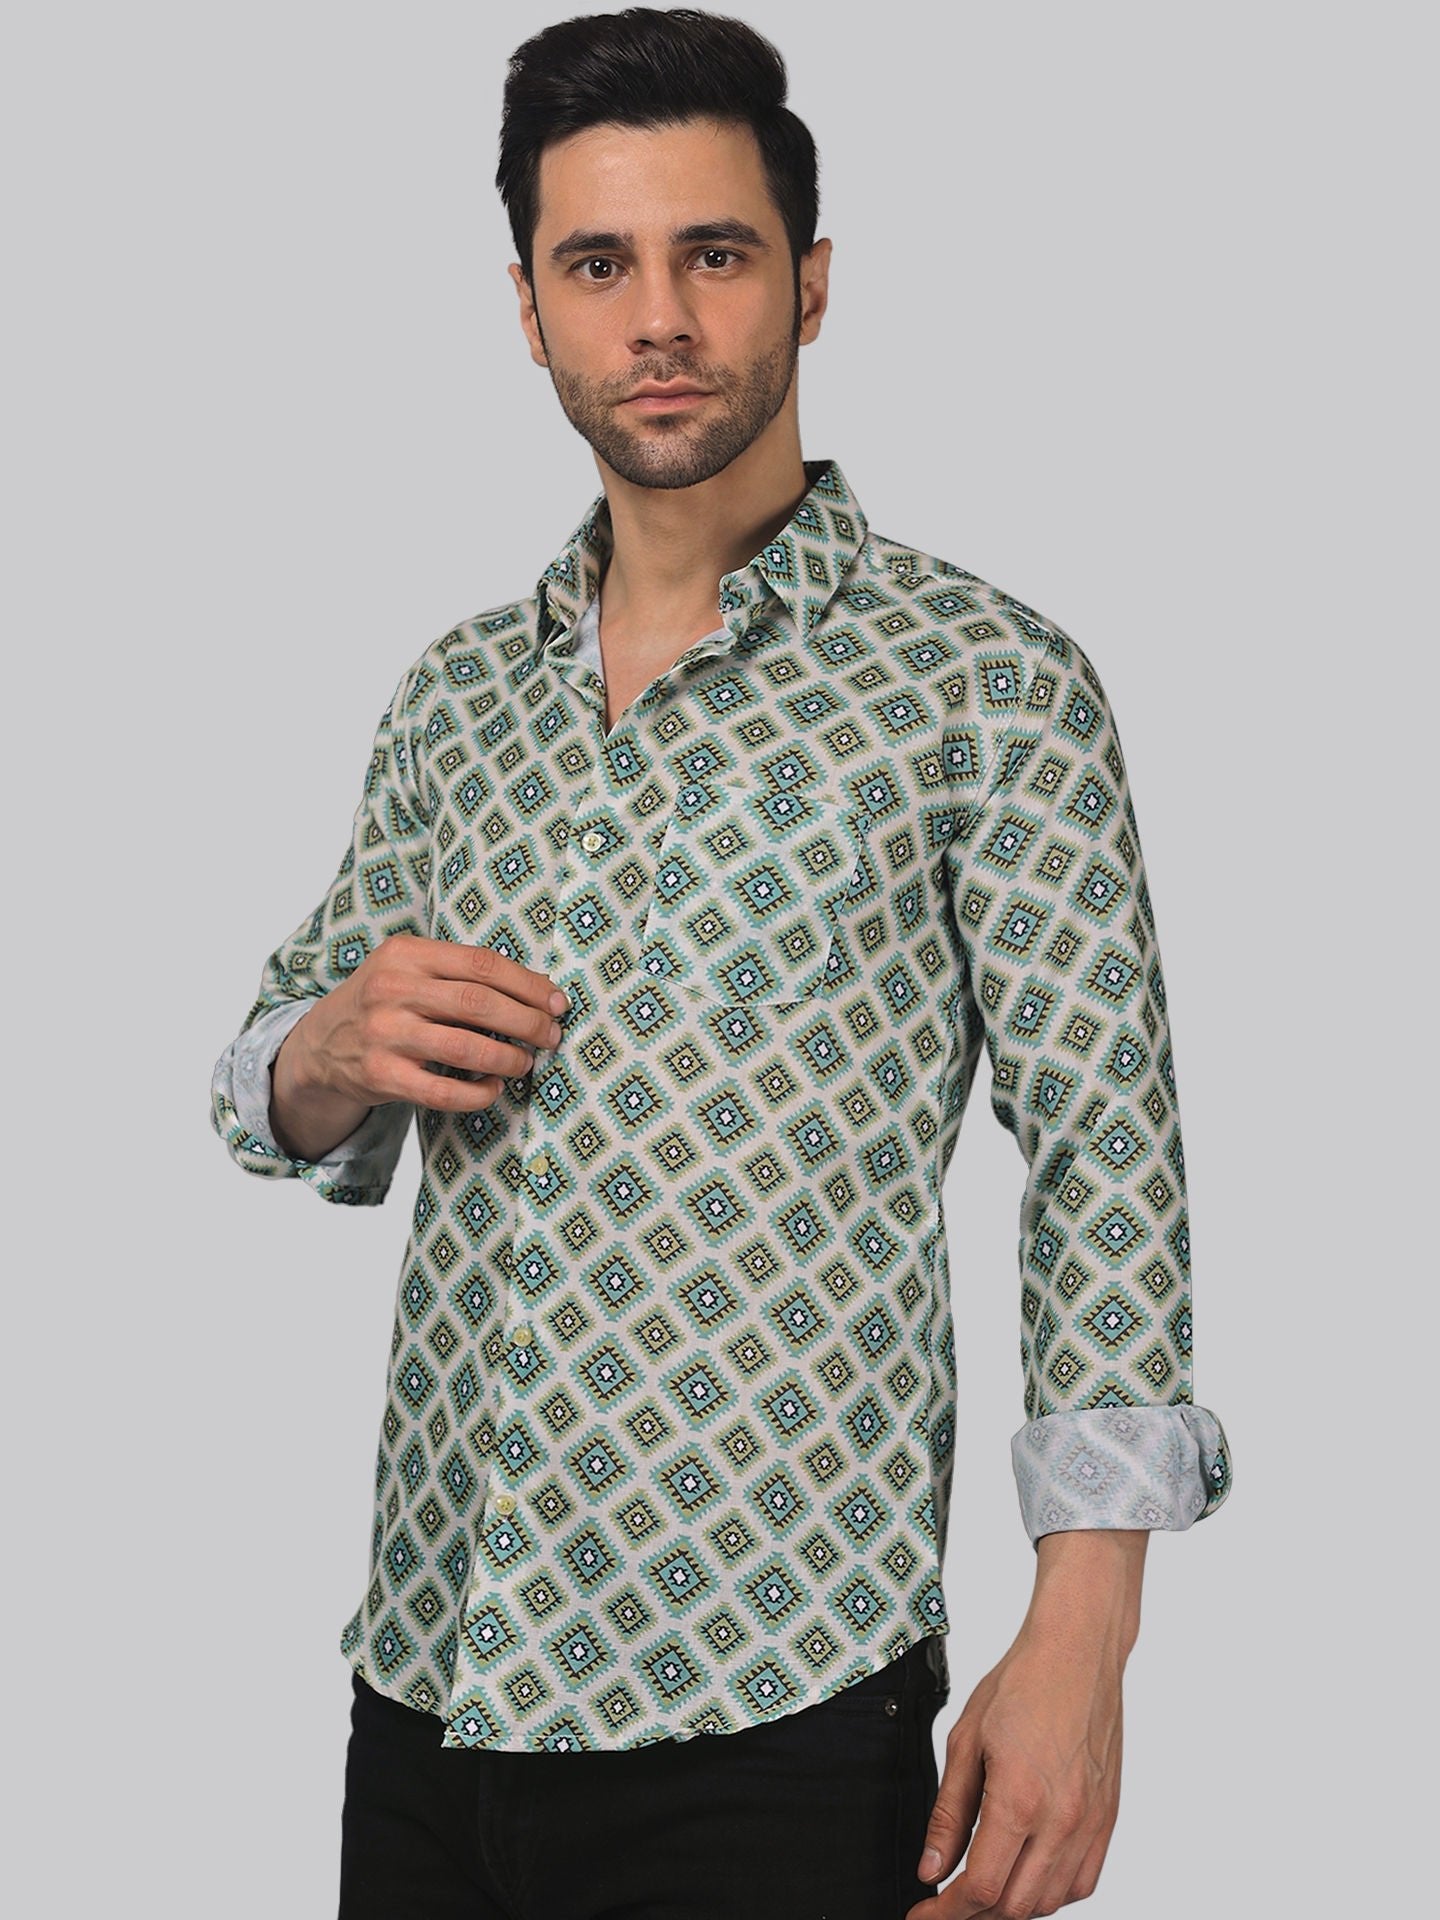 Delicate Men's Printed Full Sleeve Casual Linen Shirt - TryBuy® USA🇺🇸